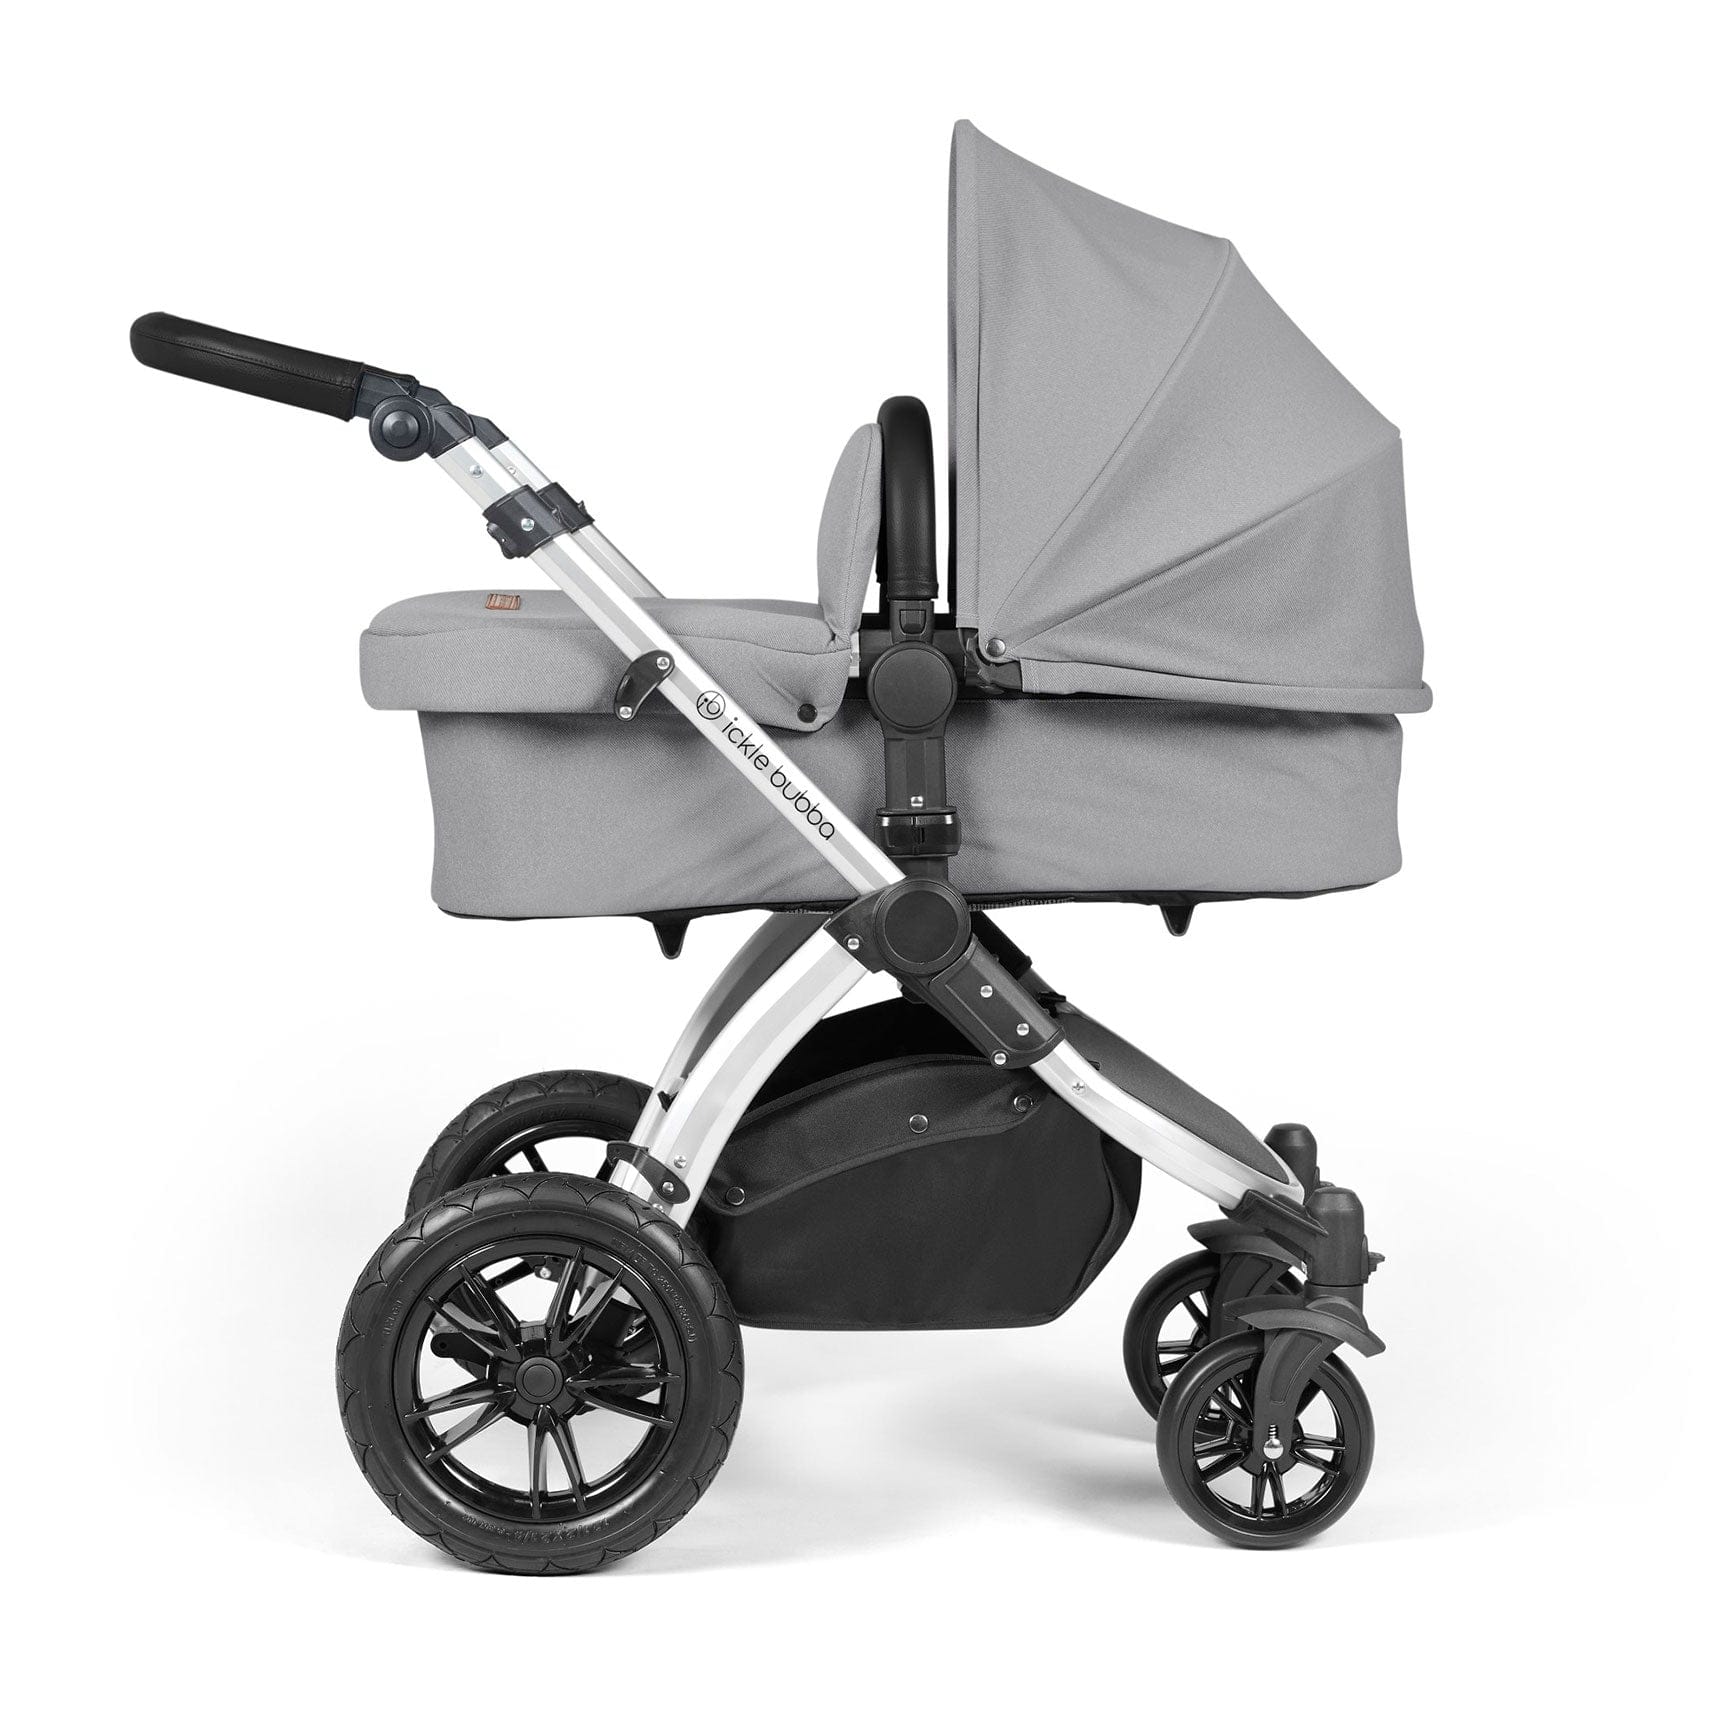 Ickle Bubba Stomp Luxe All-in-One Travel System with Isofix Base in Silver/Pearl Grey/Black Travel Systems 10-011-300-259 5056515026573